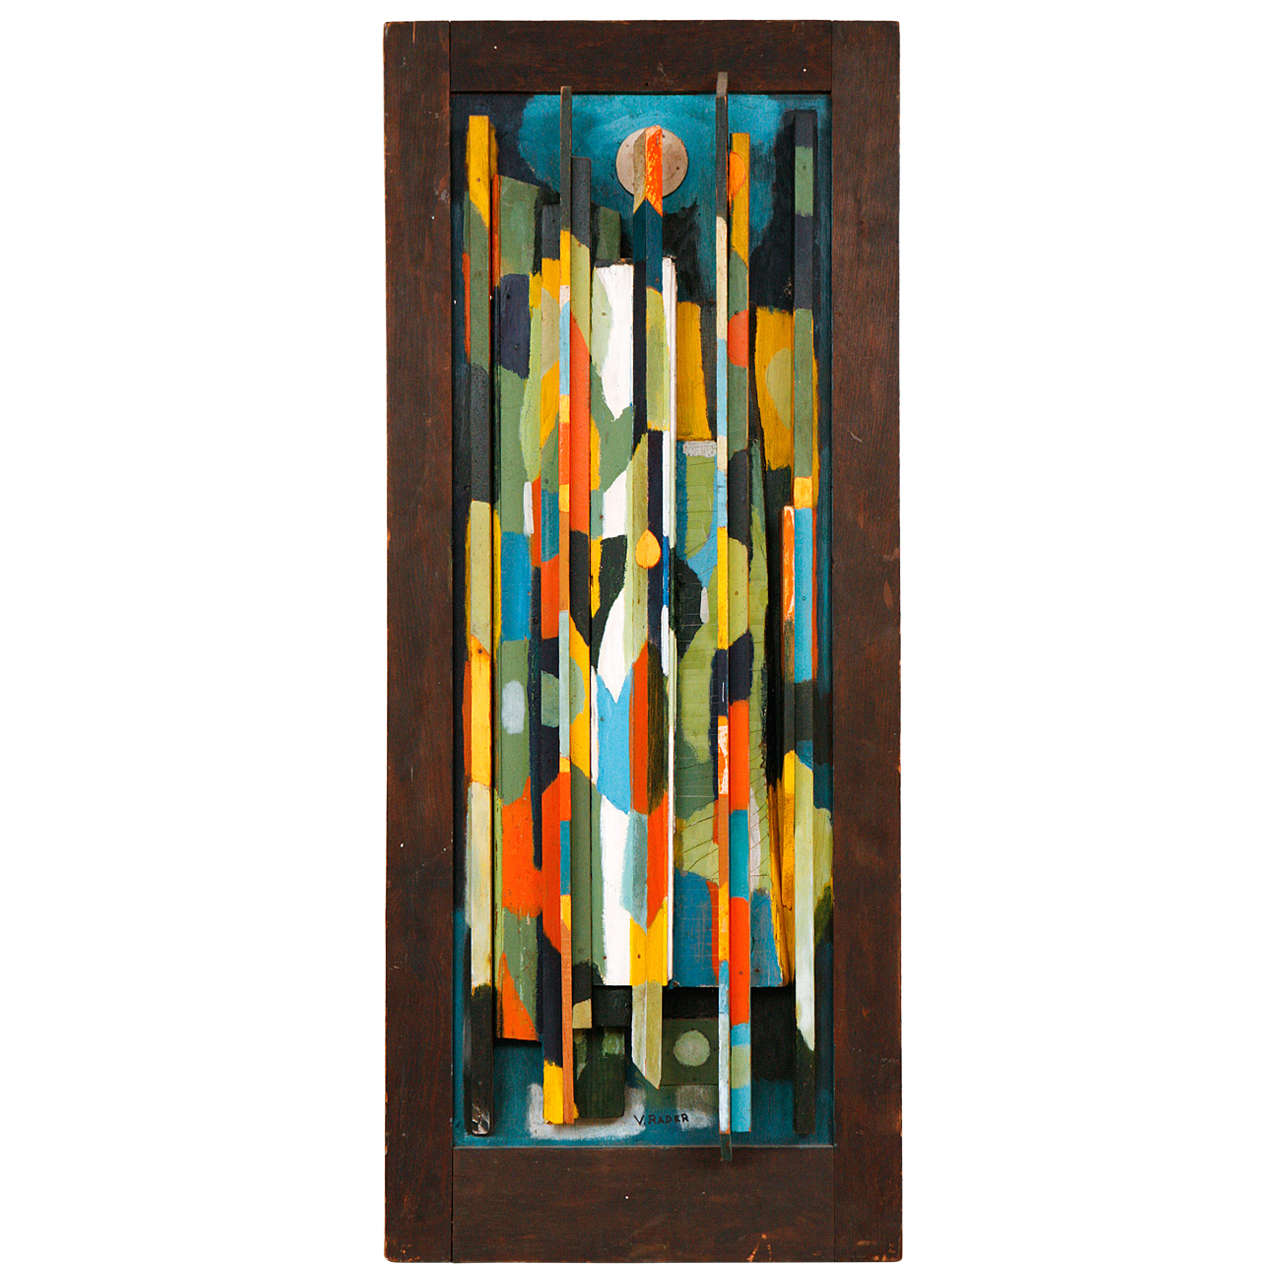 Painted Wood Relief Sculpture by Vernon Rader